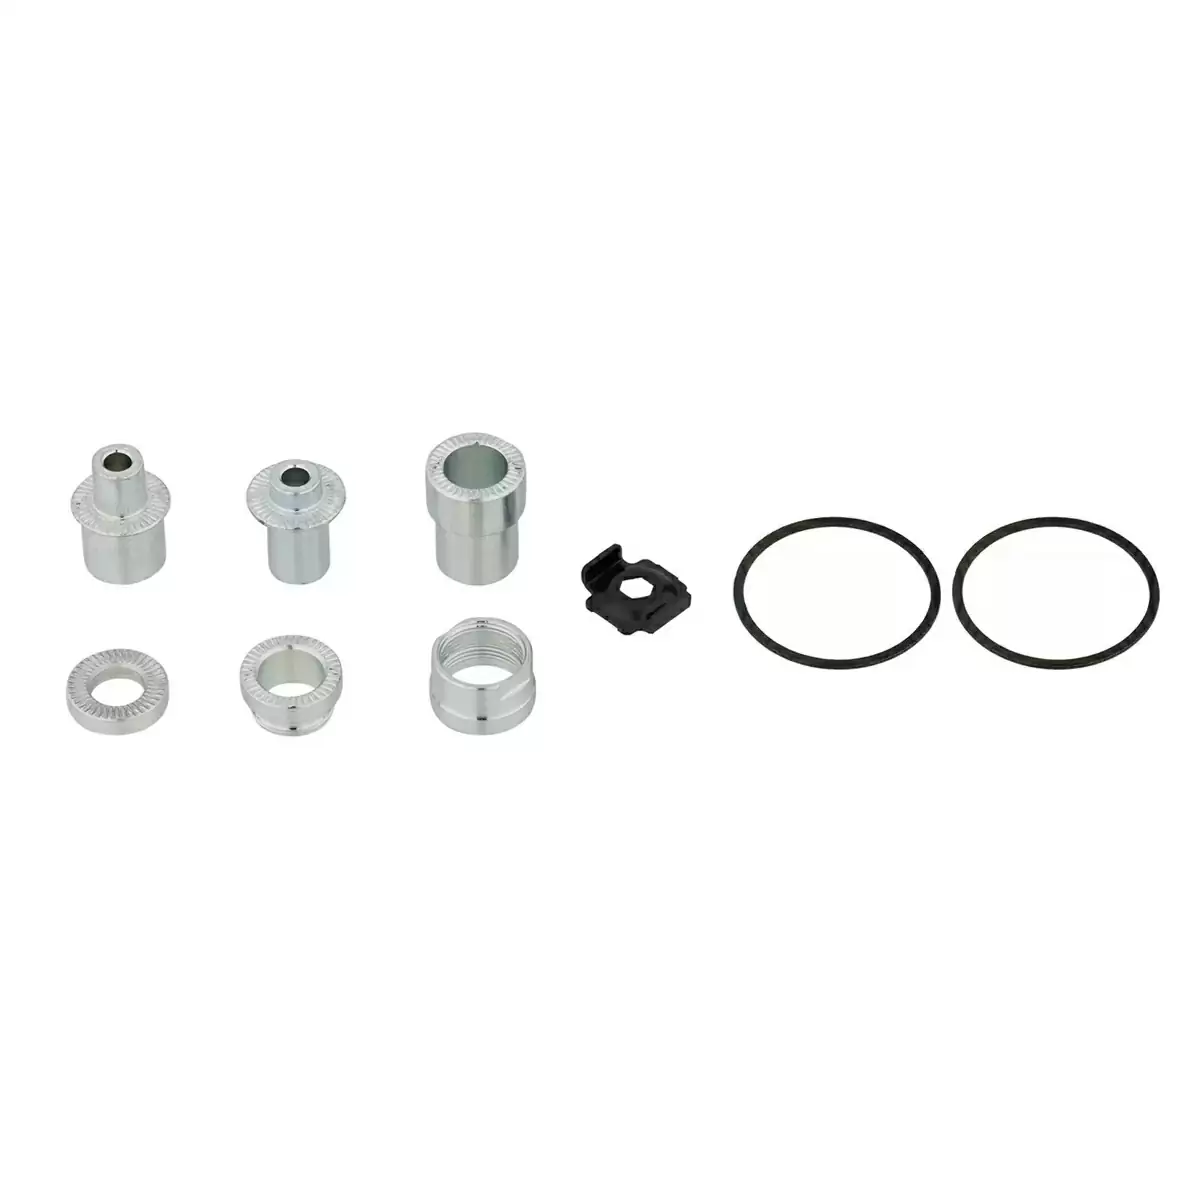 Thru axle adapter 12x142 - 10/12x135mm kit for Suito and Direto XR indoor trainers - image